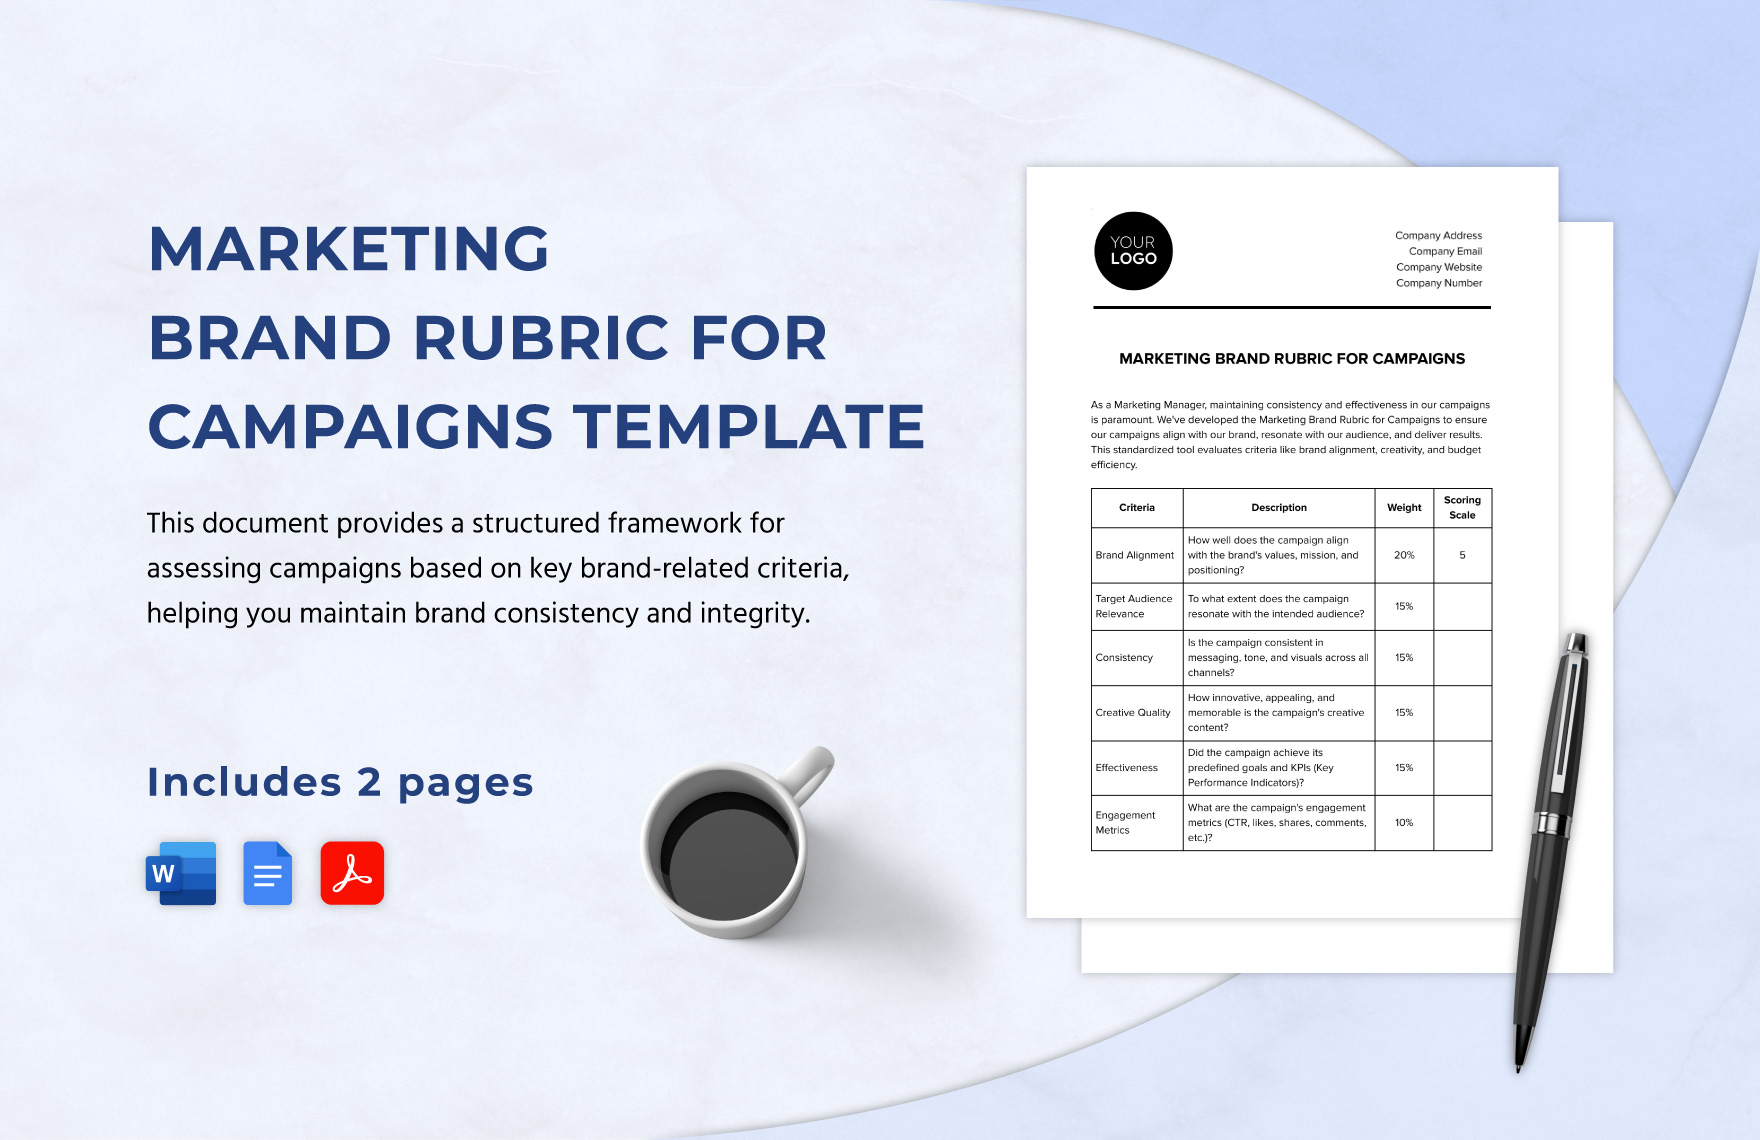 Marketing Brand Rubric for Campaigns Template in Word, Google Docs, PDF